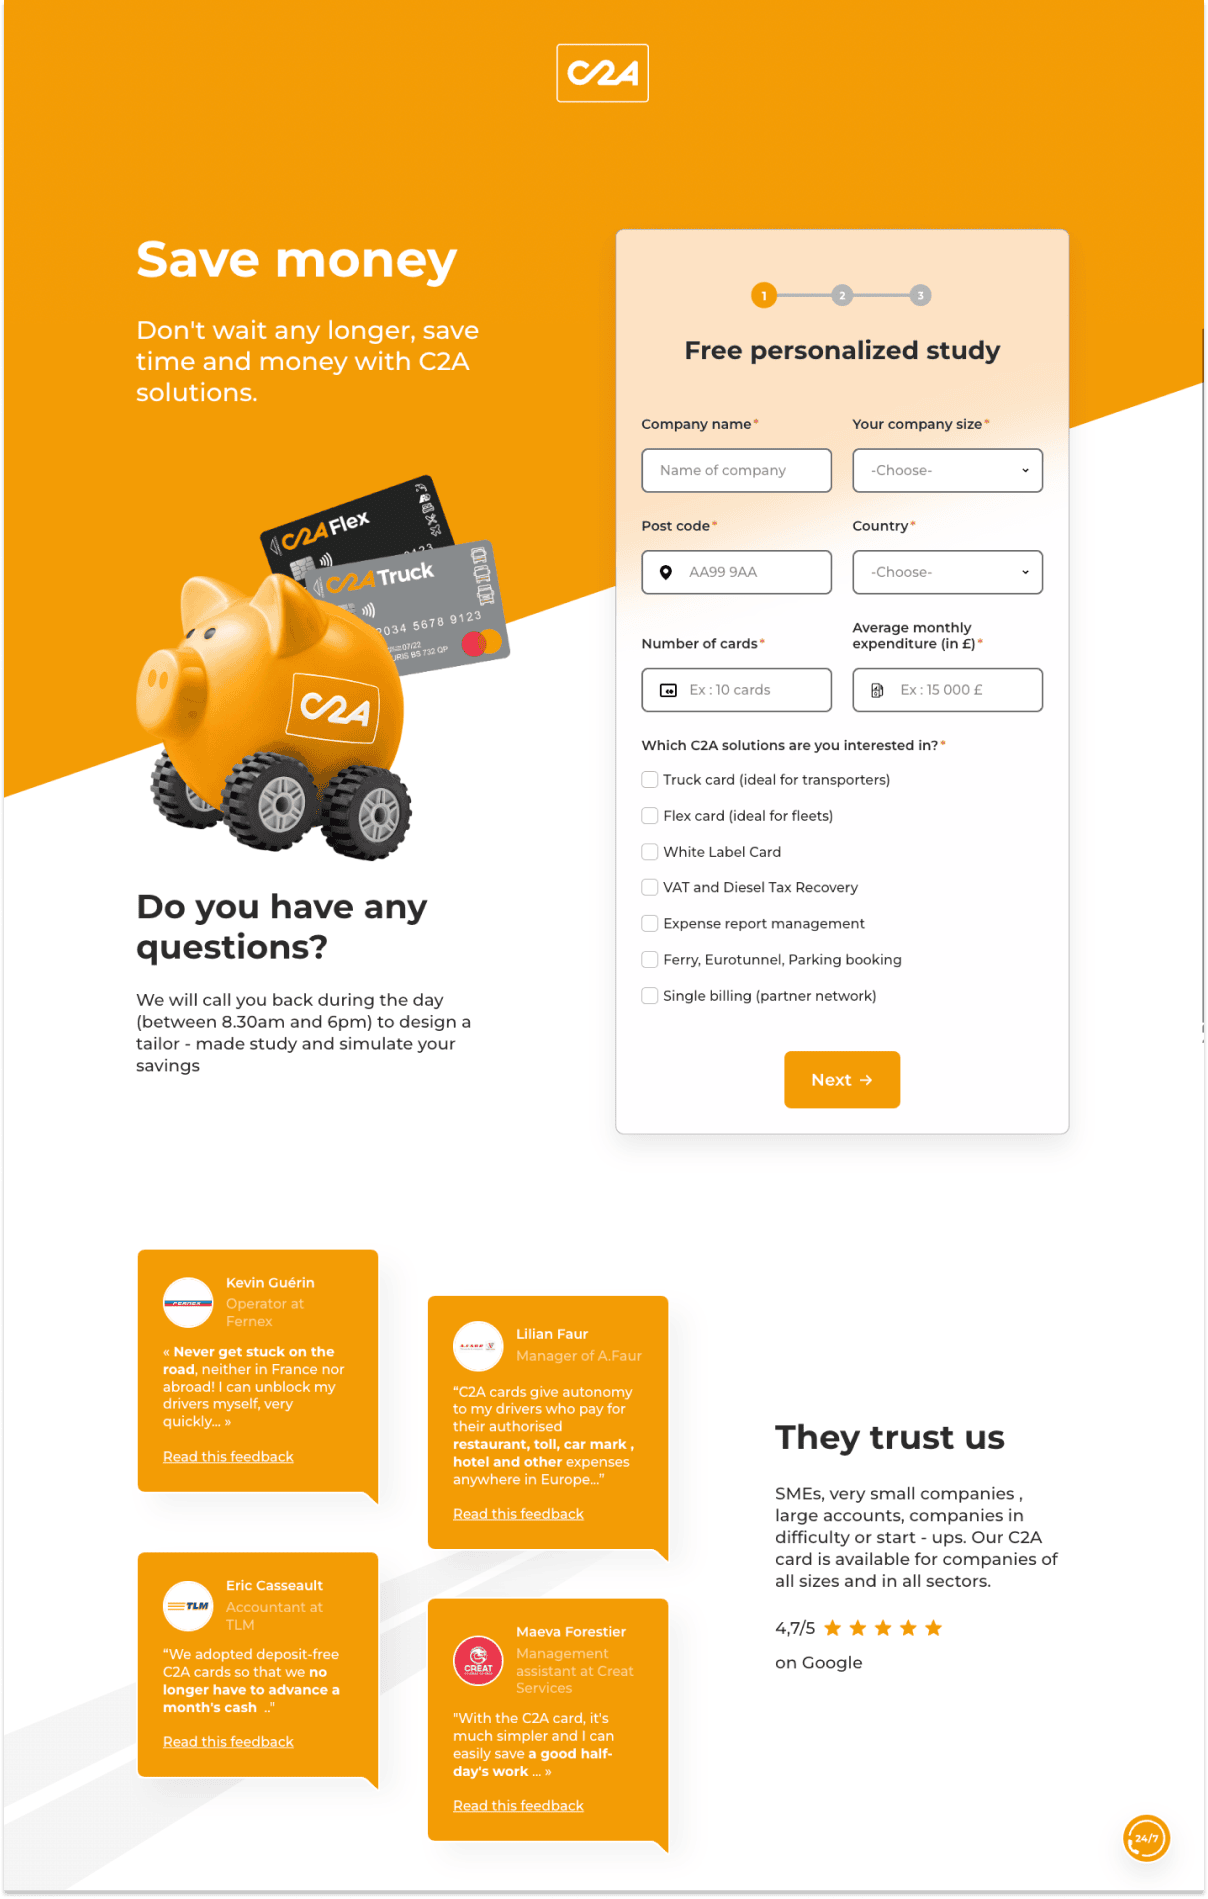 C2A's lead generation landing page from their website